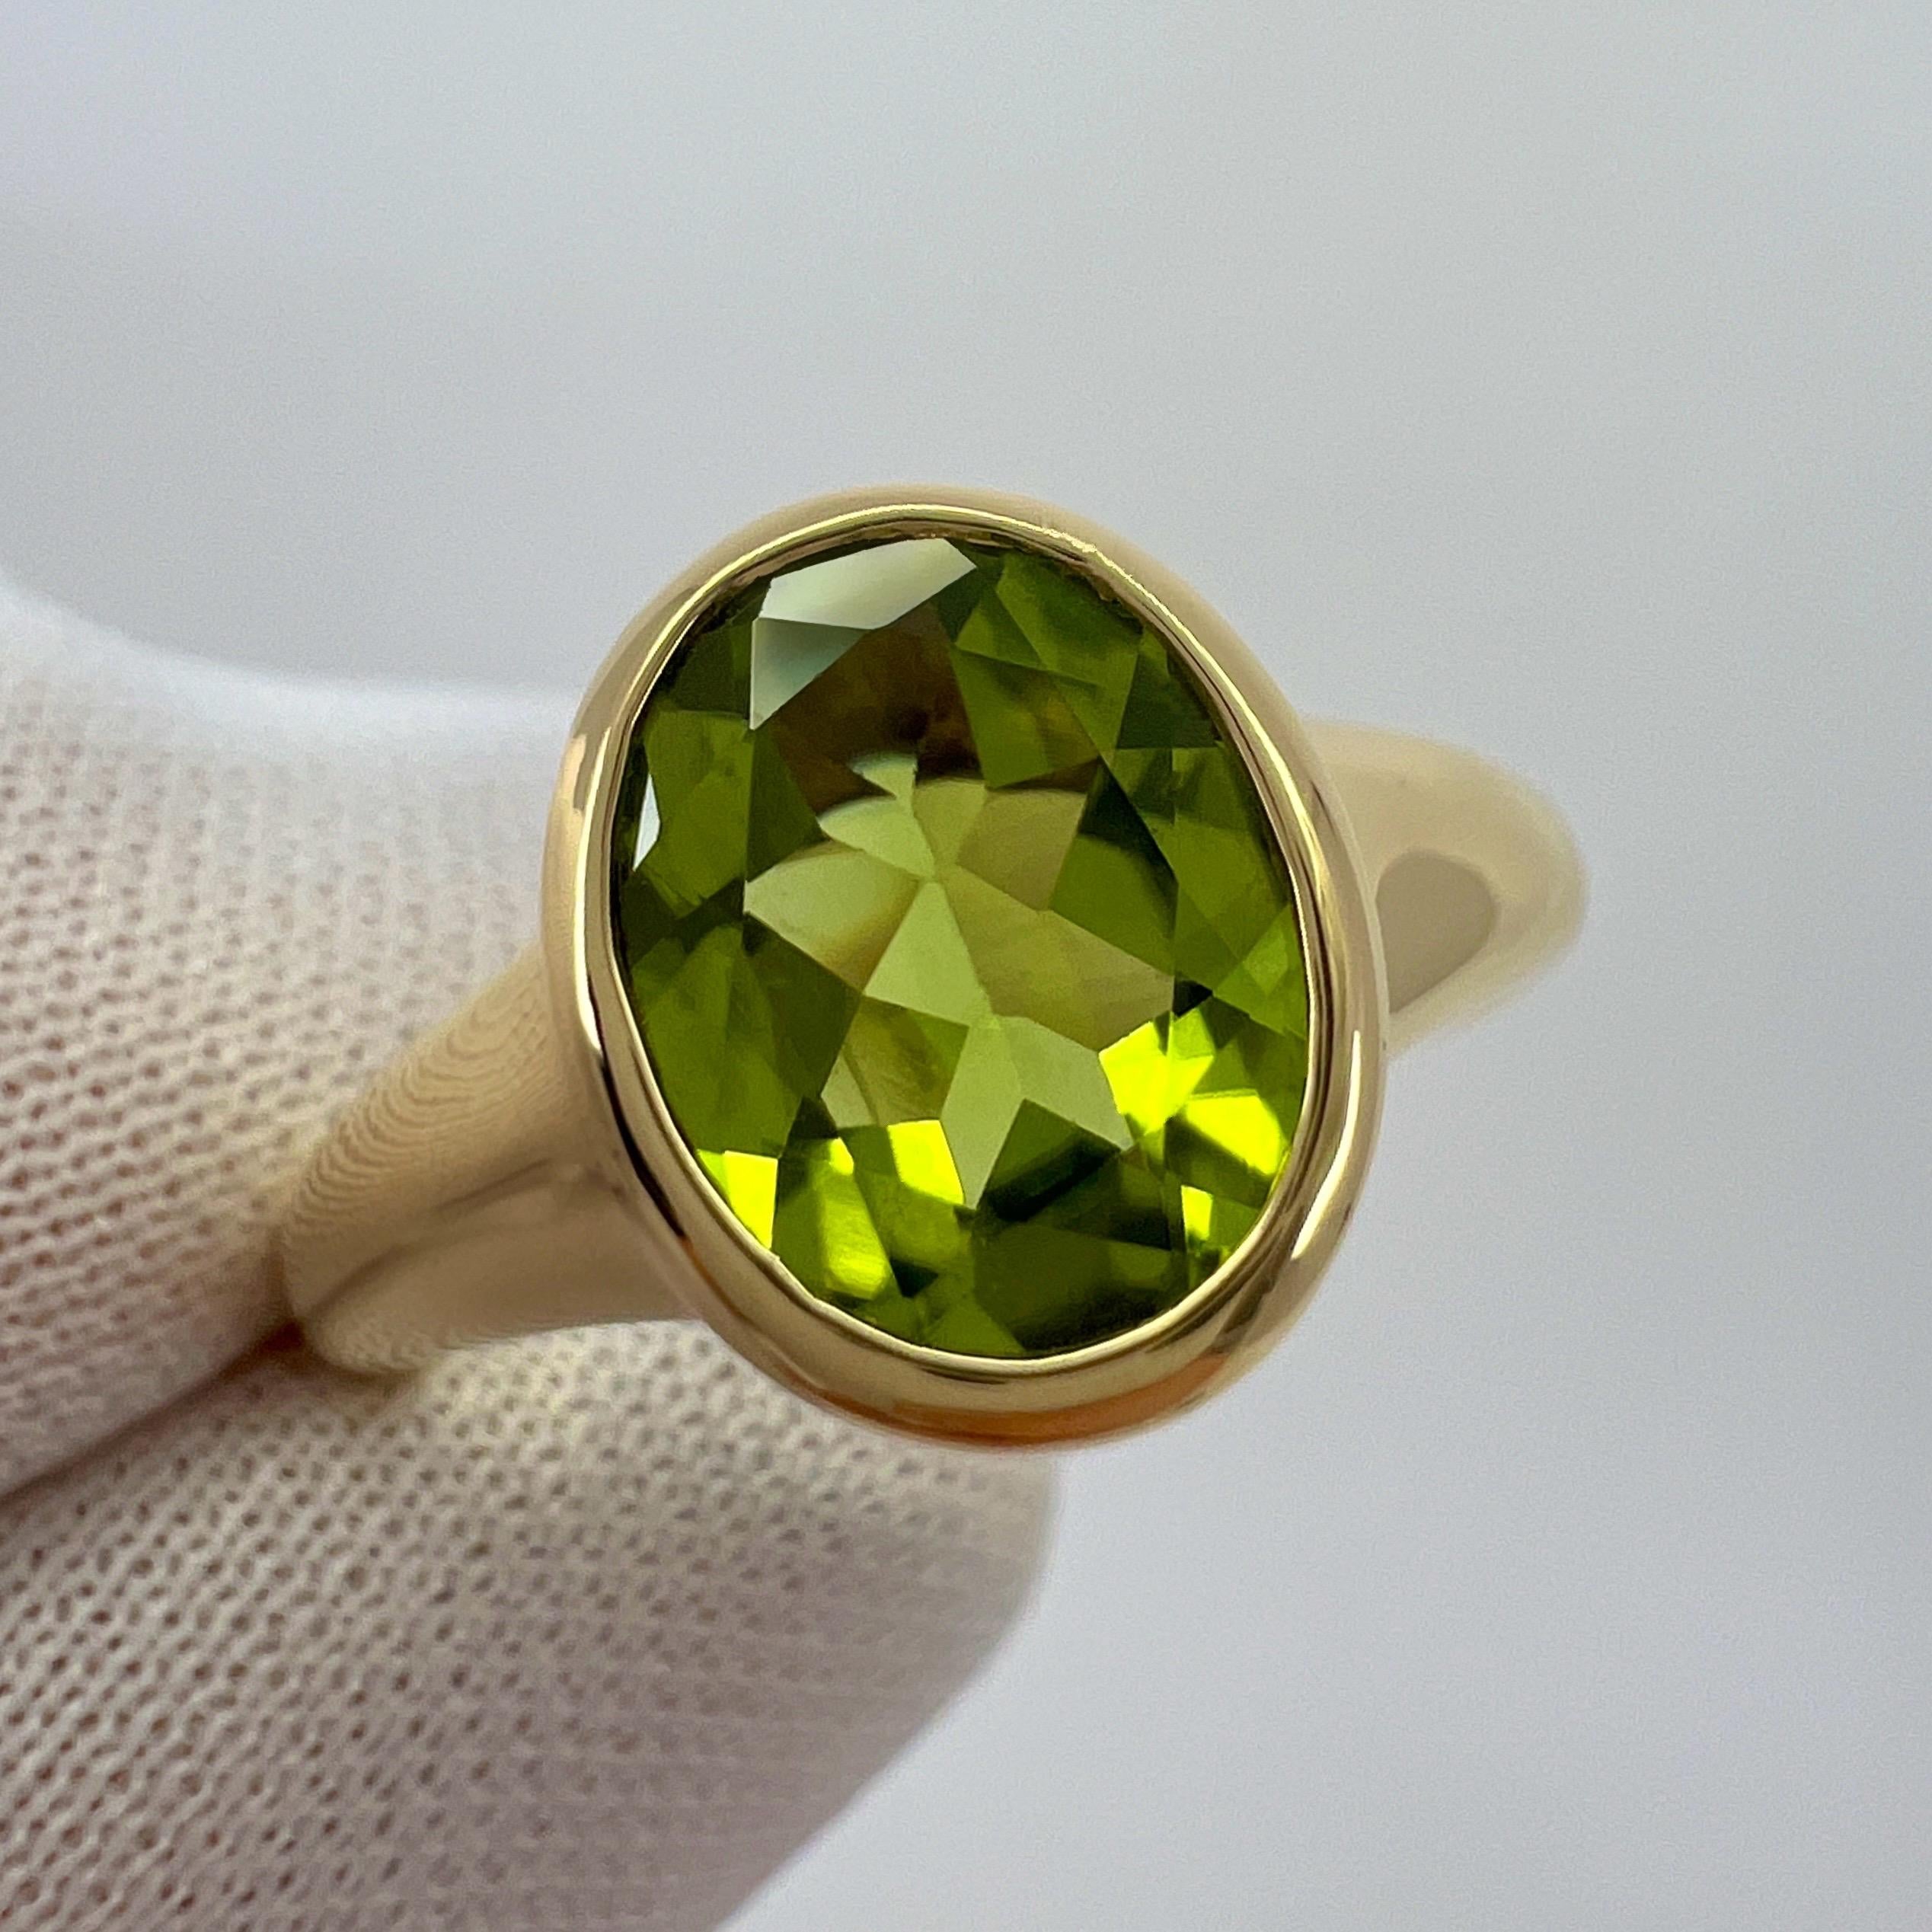 Rare Bvlgari Green Peridot Oval 18k Yellow Gold Signet Style Bezel Rubover Ring For Sale 5